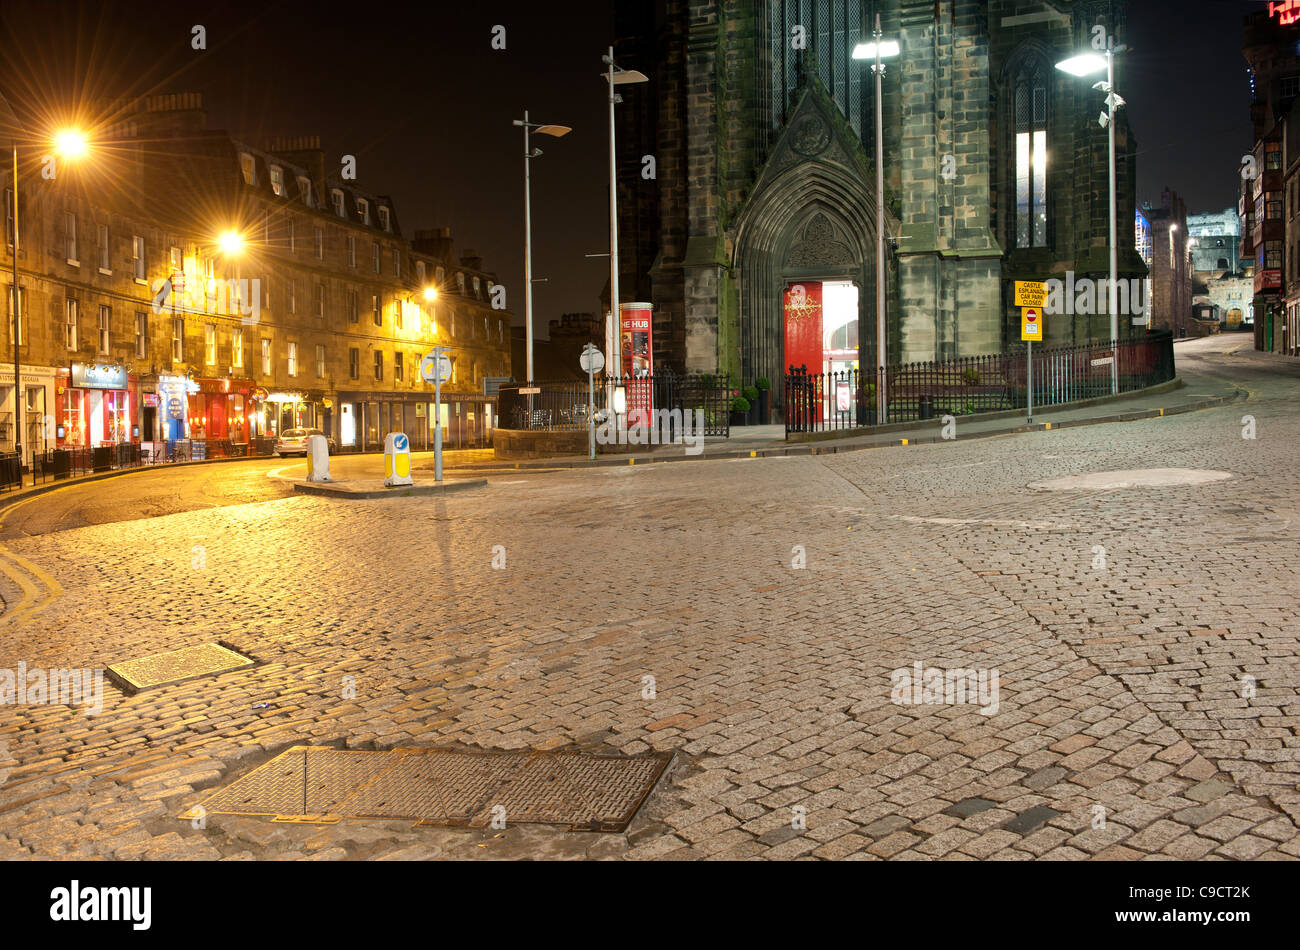 Edinburgh street scene at night looking towards Johnston Terrace and the Hub Café and Restaurant from The Royal Mile. Stock Photo